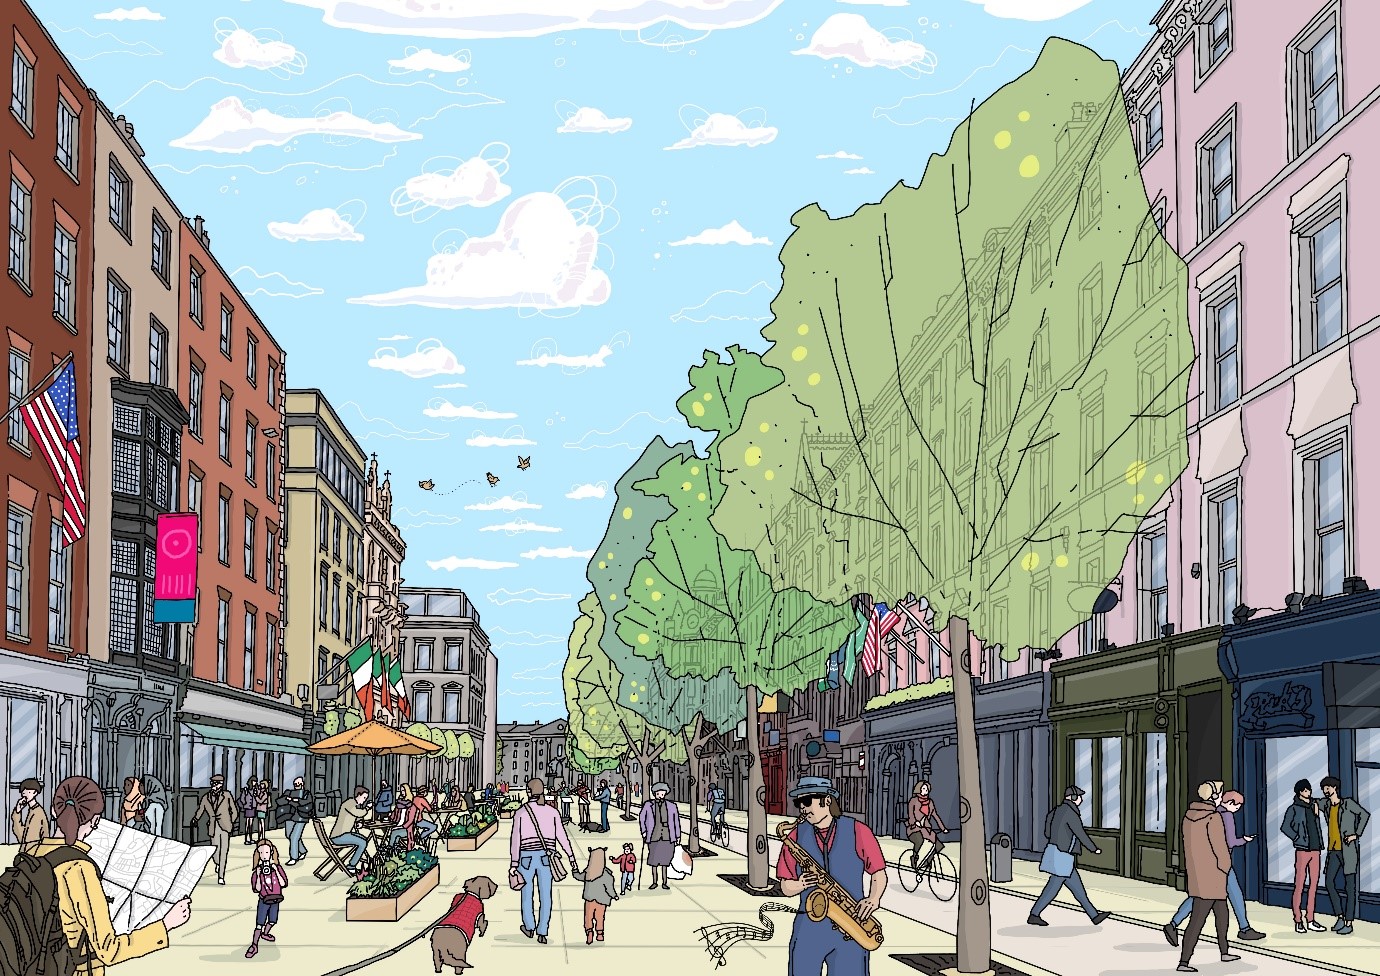 Concept illustration of space in use, looking east along Dame Street towards Trinity College, image taken from Consultation Process on options for public realm improvements to Dame Street as part of the College Green project